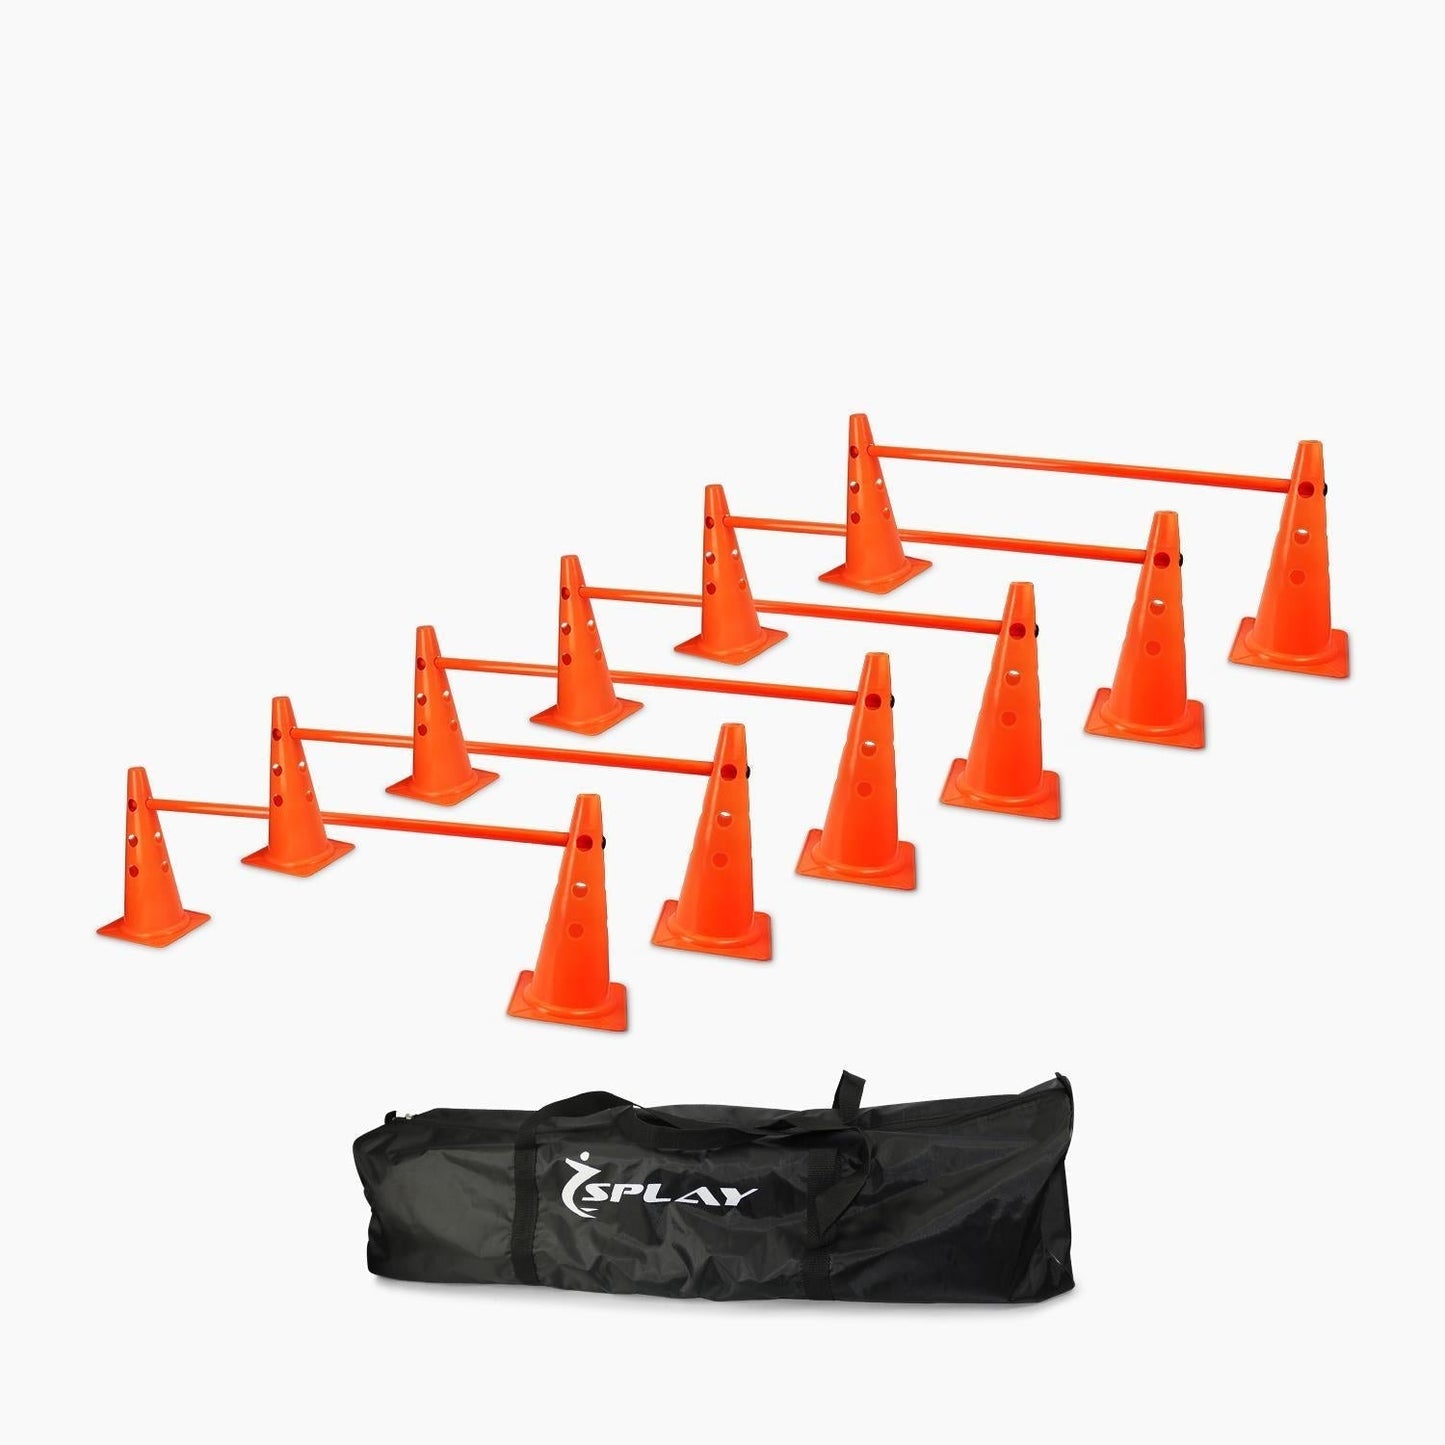 Buy Agility Trainer Kit - 12 cones 40cm. With Hole and 6 Poles-Agility Kits-Splay-Orange-Splay UK Online